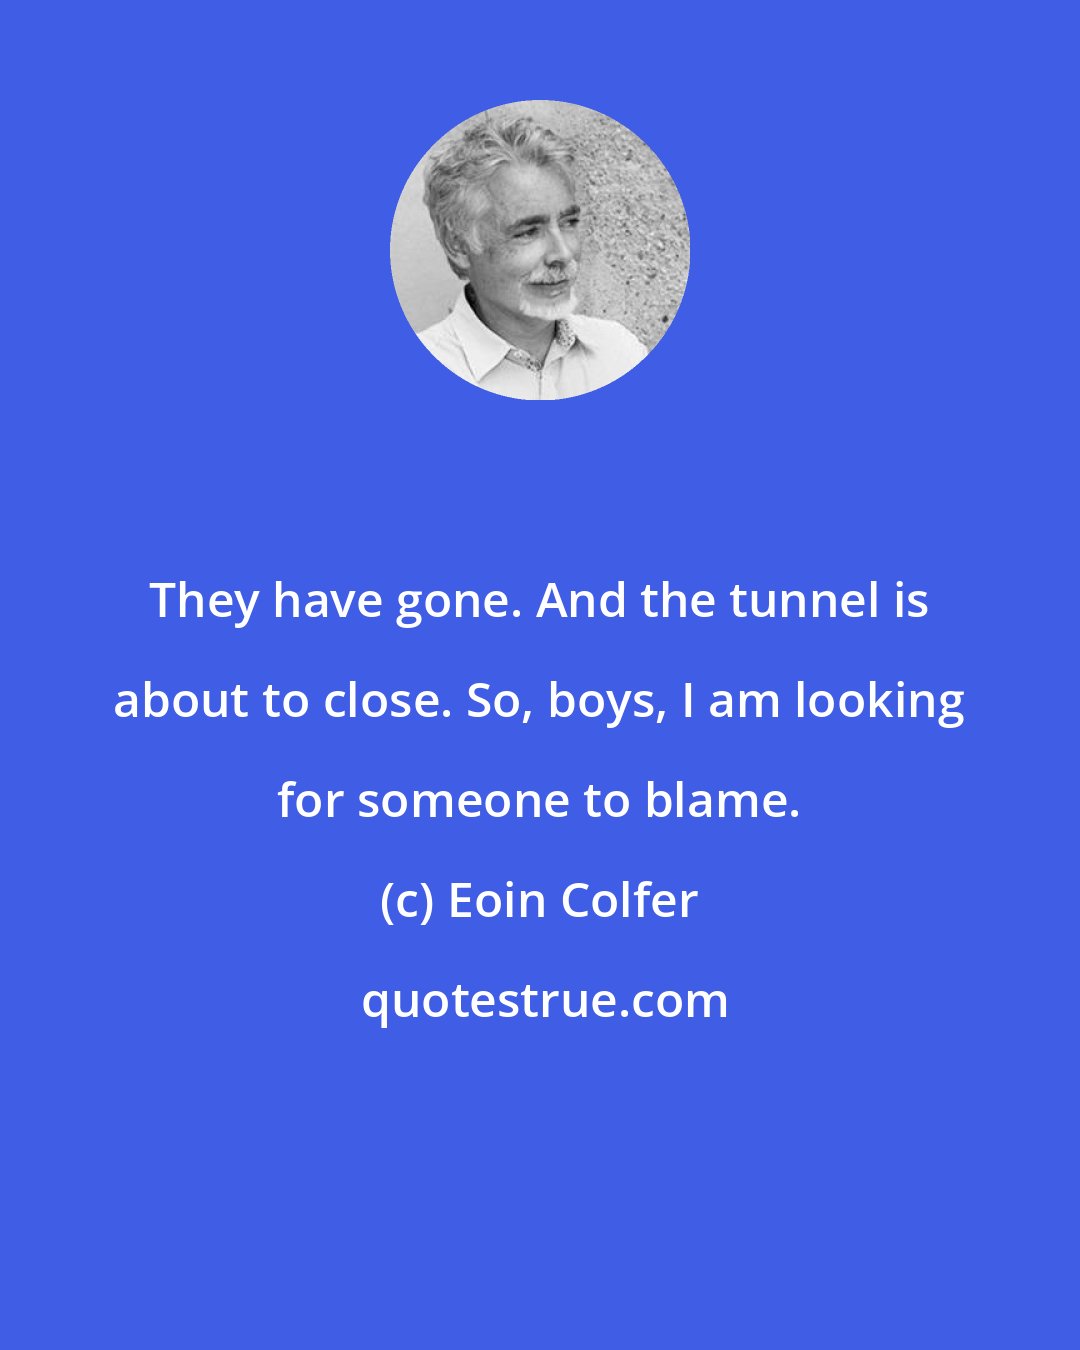 Eoin Colfer: They have gone. And the tunnel is about to close. So, boys, I am looking for someone to blame.